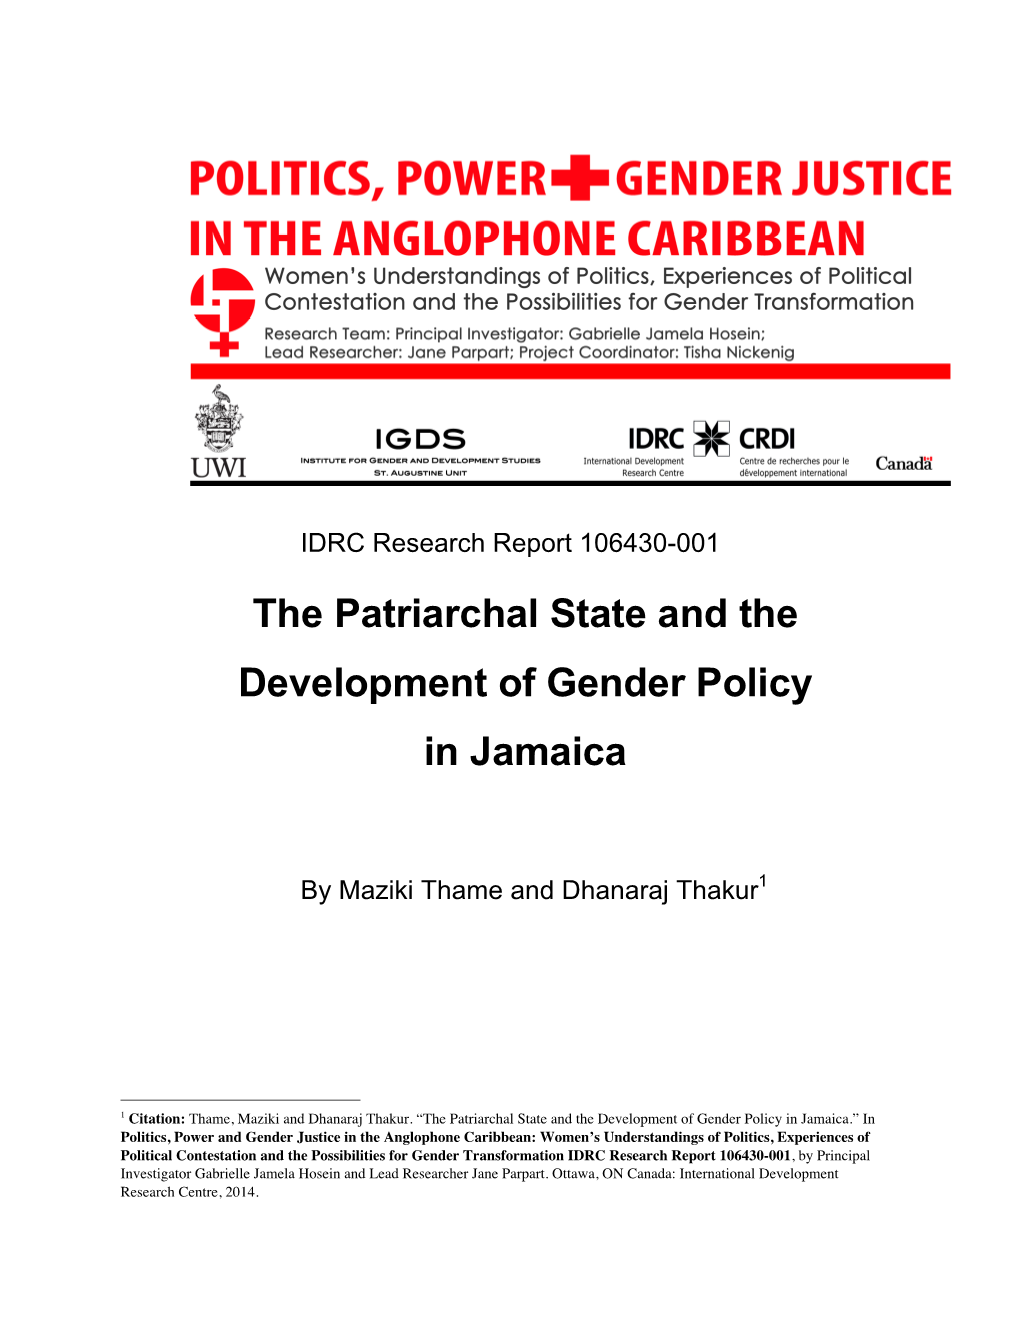 The Patriarchal State and the Development of Gender Policy in Jamaica